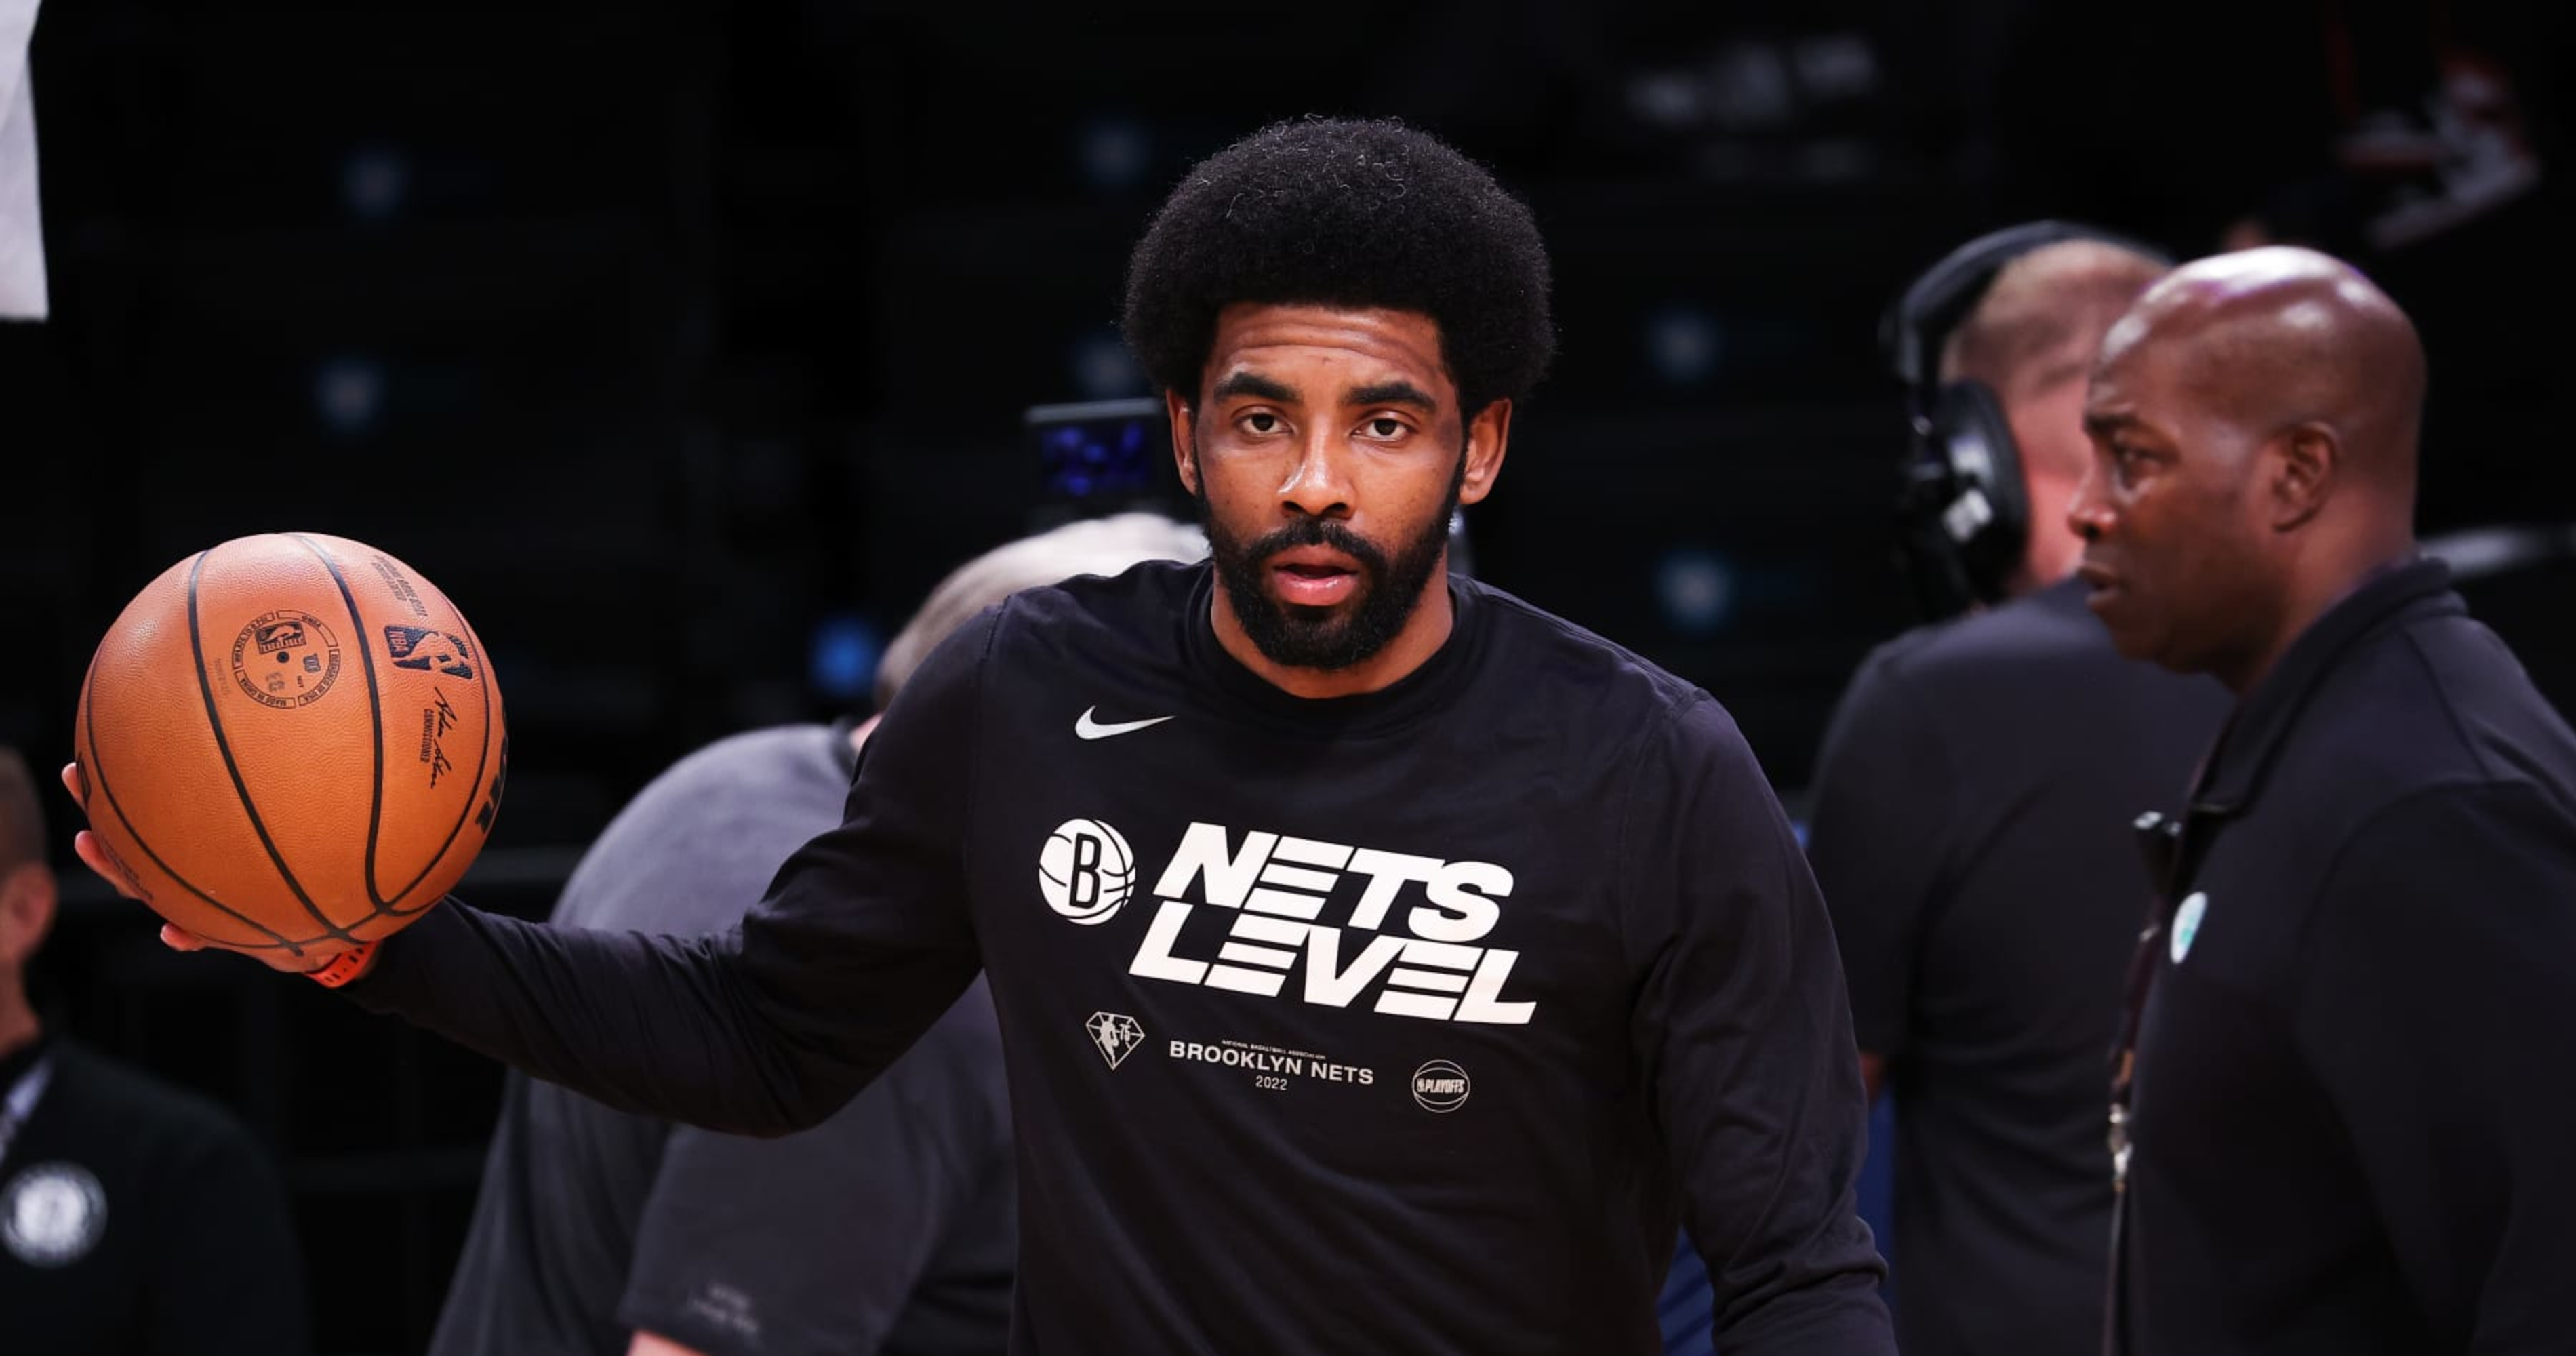 Nets Rumors: Kyrie Irving Disputes Reported Discontent With Sean Marks, Steve Nash - Bleacher Report